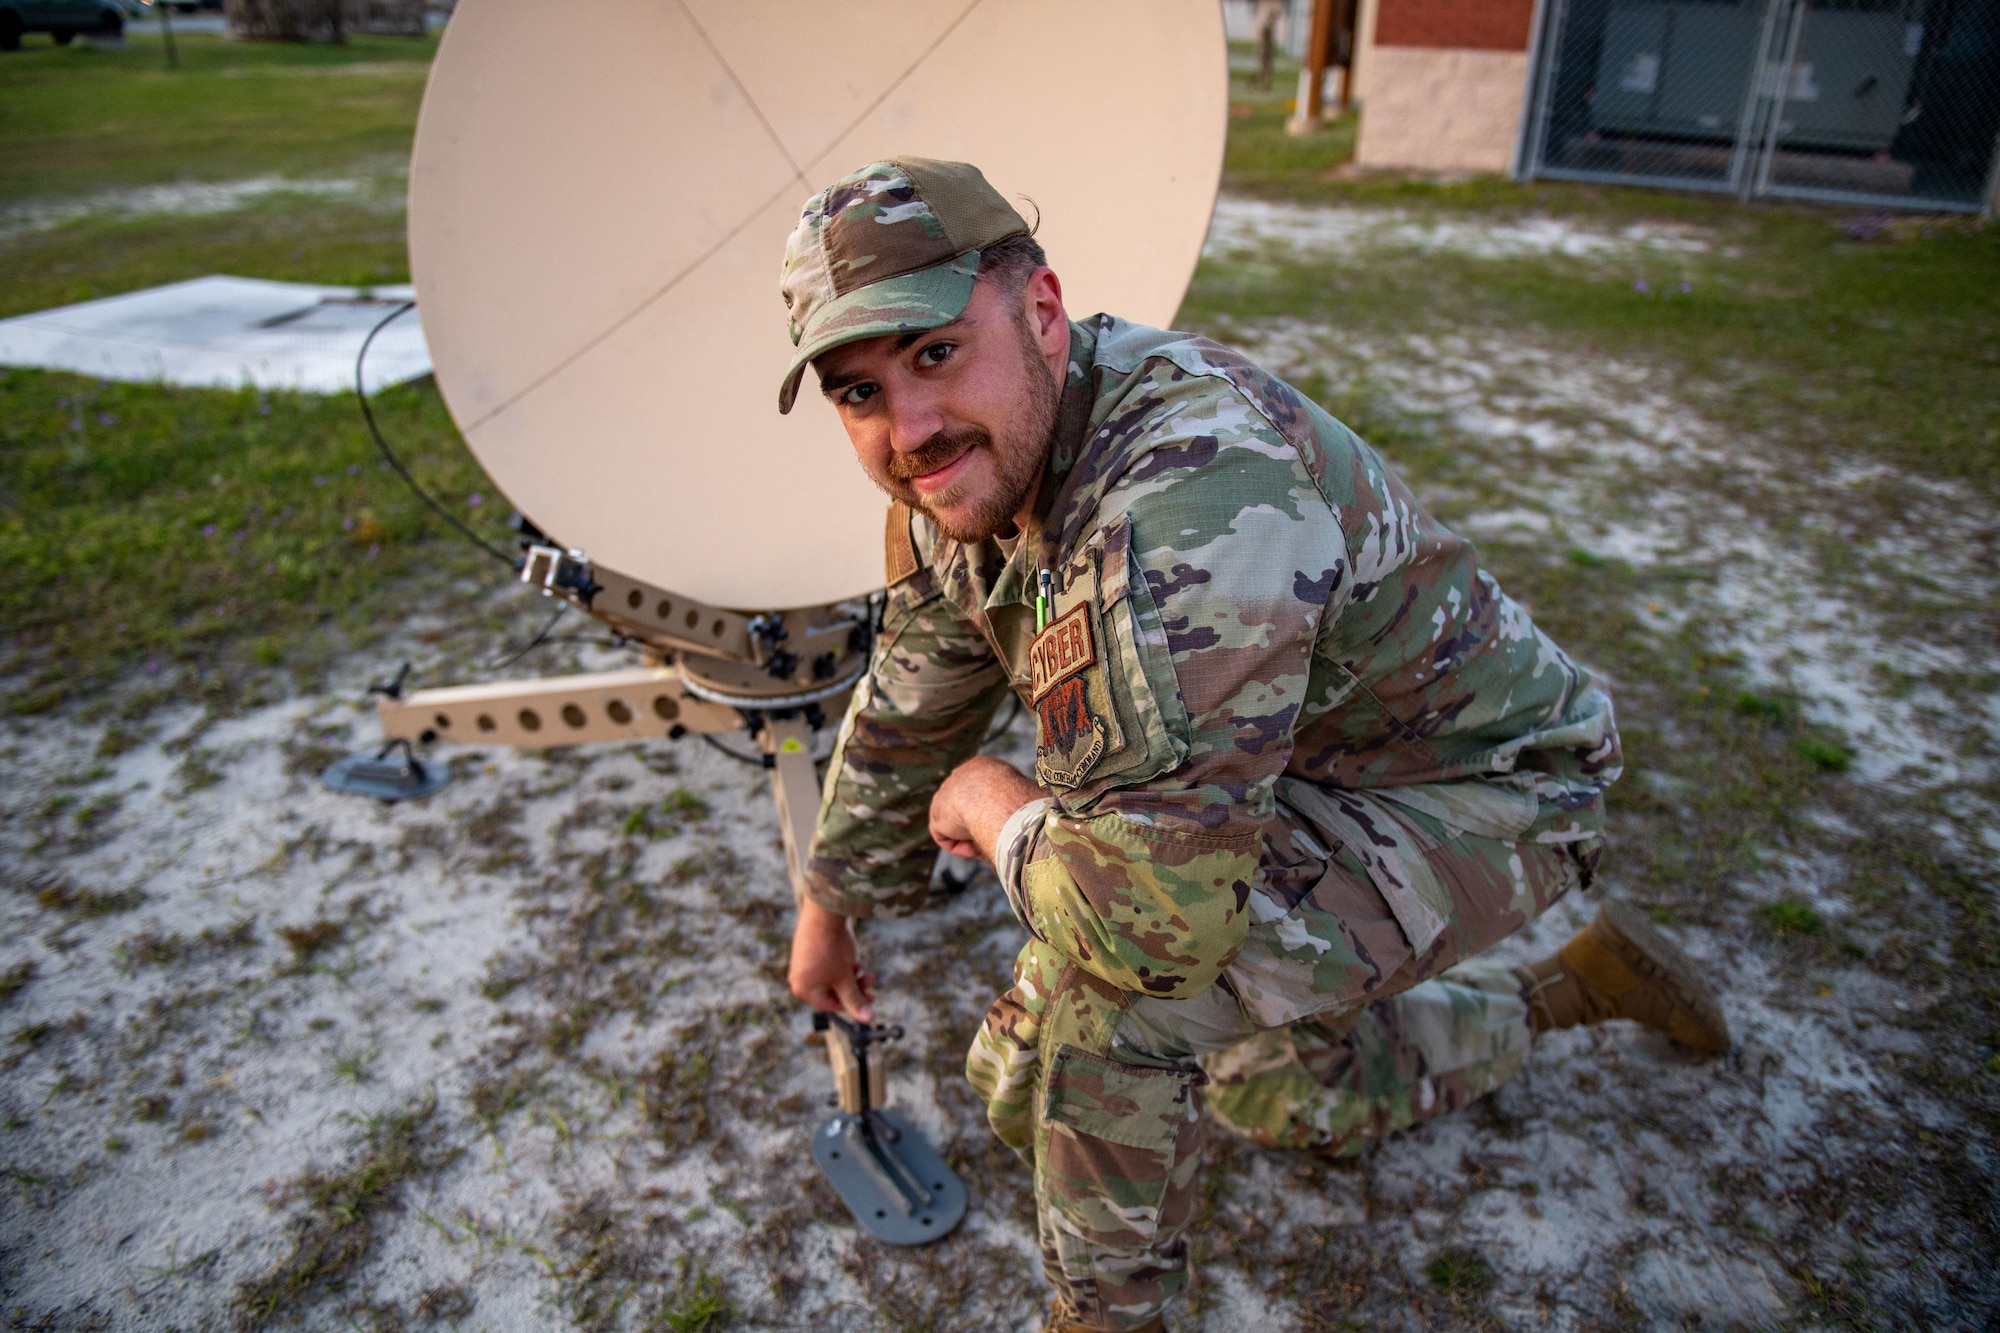 U.S. Air Force Staff Sgt. Nathan Knight, 23rd Communications Squadron infrastructure supervisor, poses for a photo during Exercise Ready Tiger  24-1 at Savannah Air National Guard Base, Georgia, April 8, 2024. During Ready Tiger 24-1, exercise inspectors will assess the 23rd Wing's proficiency in employing decentralized command and control to fulfill air tasking orders across geographically dispersed areas amid communication challenges, integrating Agile Combat Employment principles such as integrated combat turns, forward aerial refueling points, multi-capable Airmen, and combat search and rescue capabilities. (U.S. Air Force photo by Senior Airman Courtney Sebastianelli)